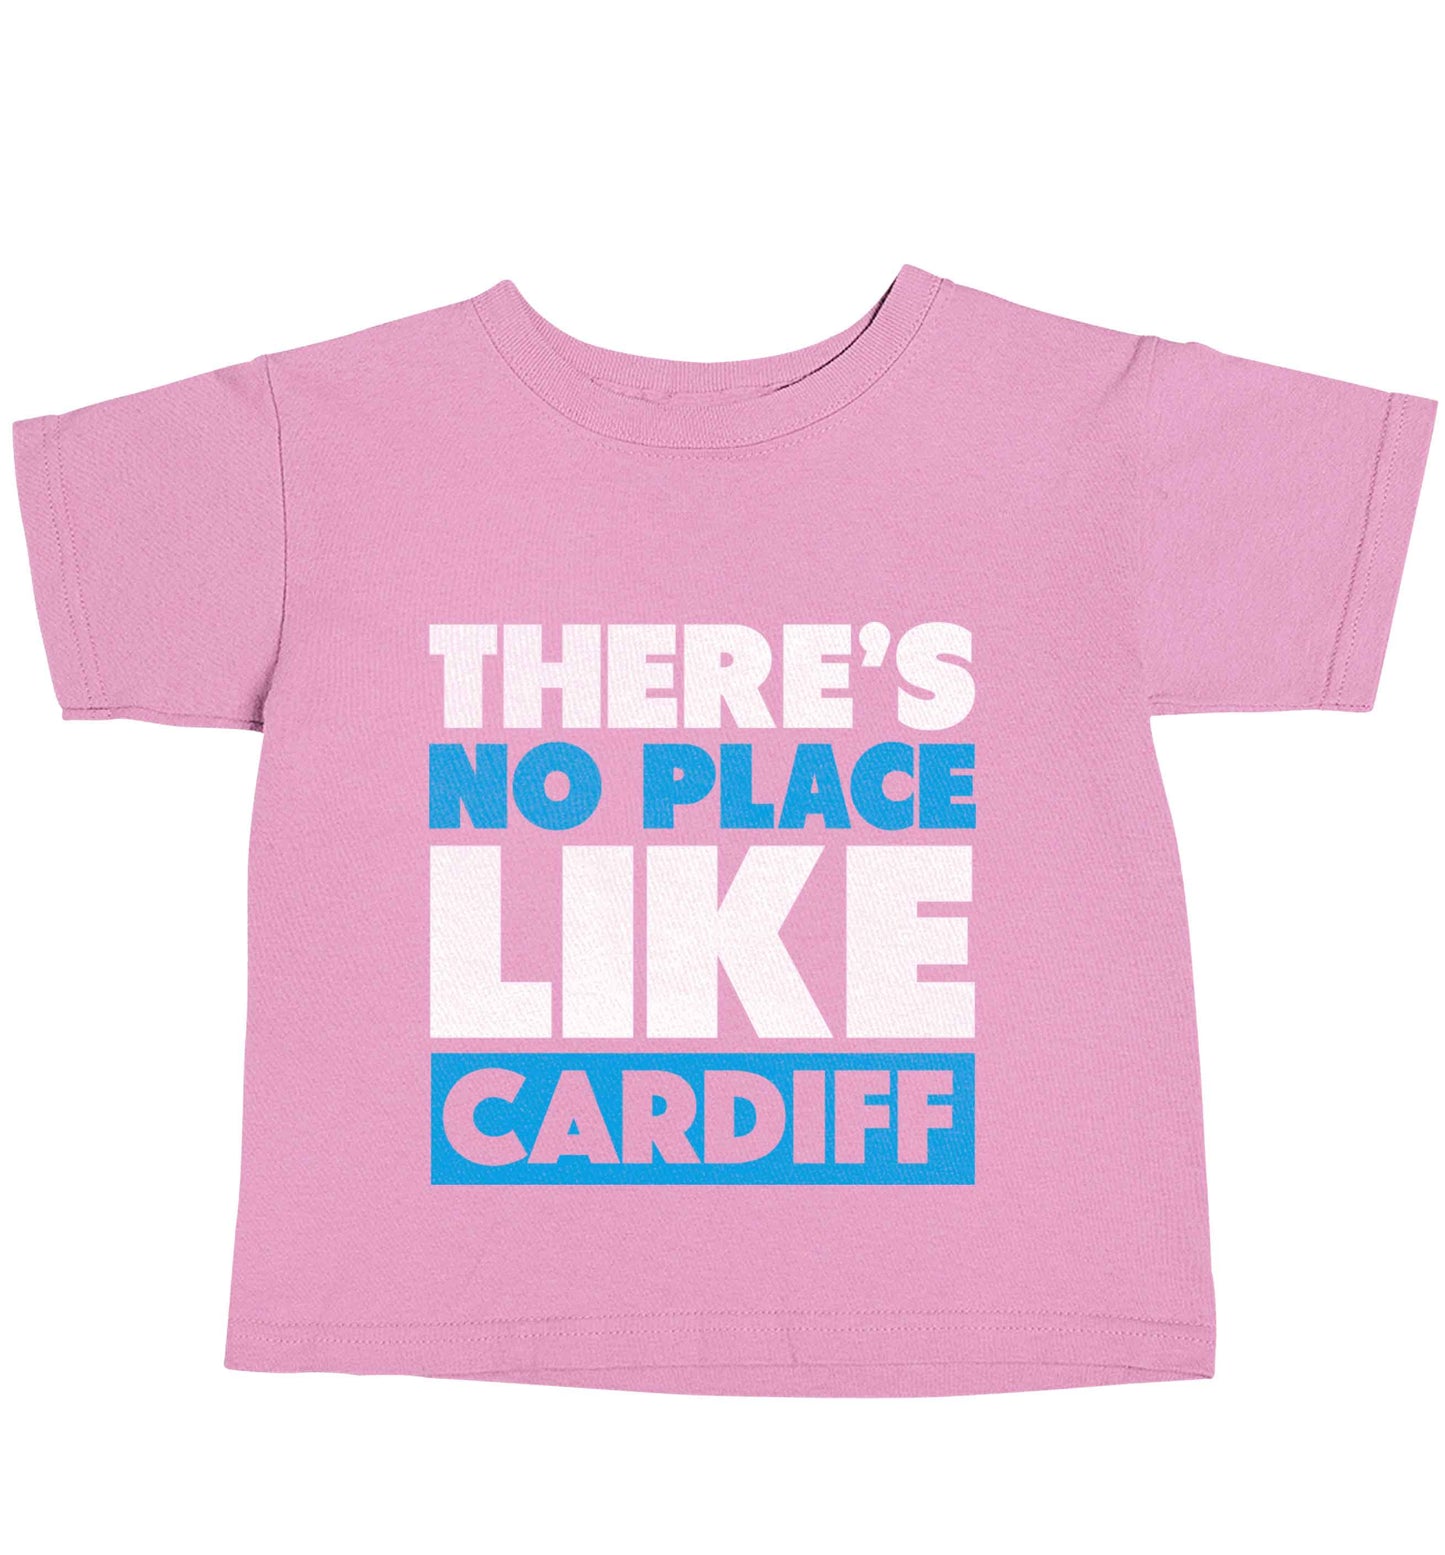 There's no place like Cardiff light pink baby toddler Tshirt 2 Years